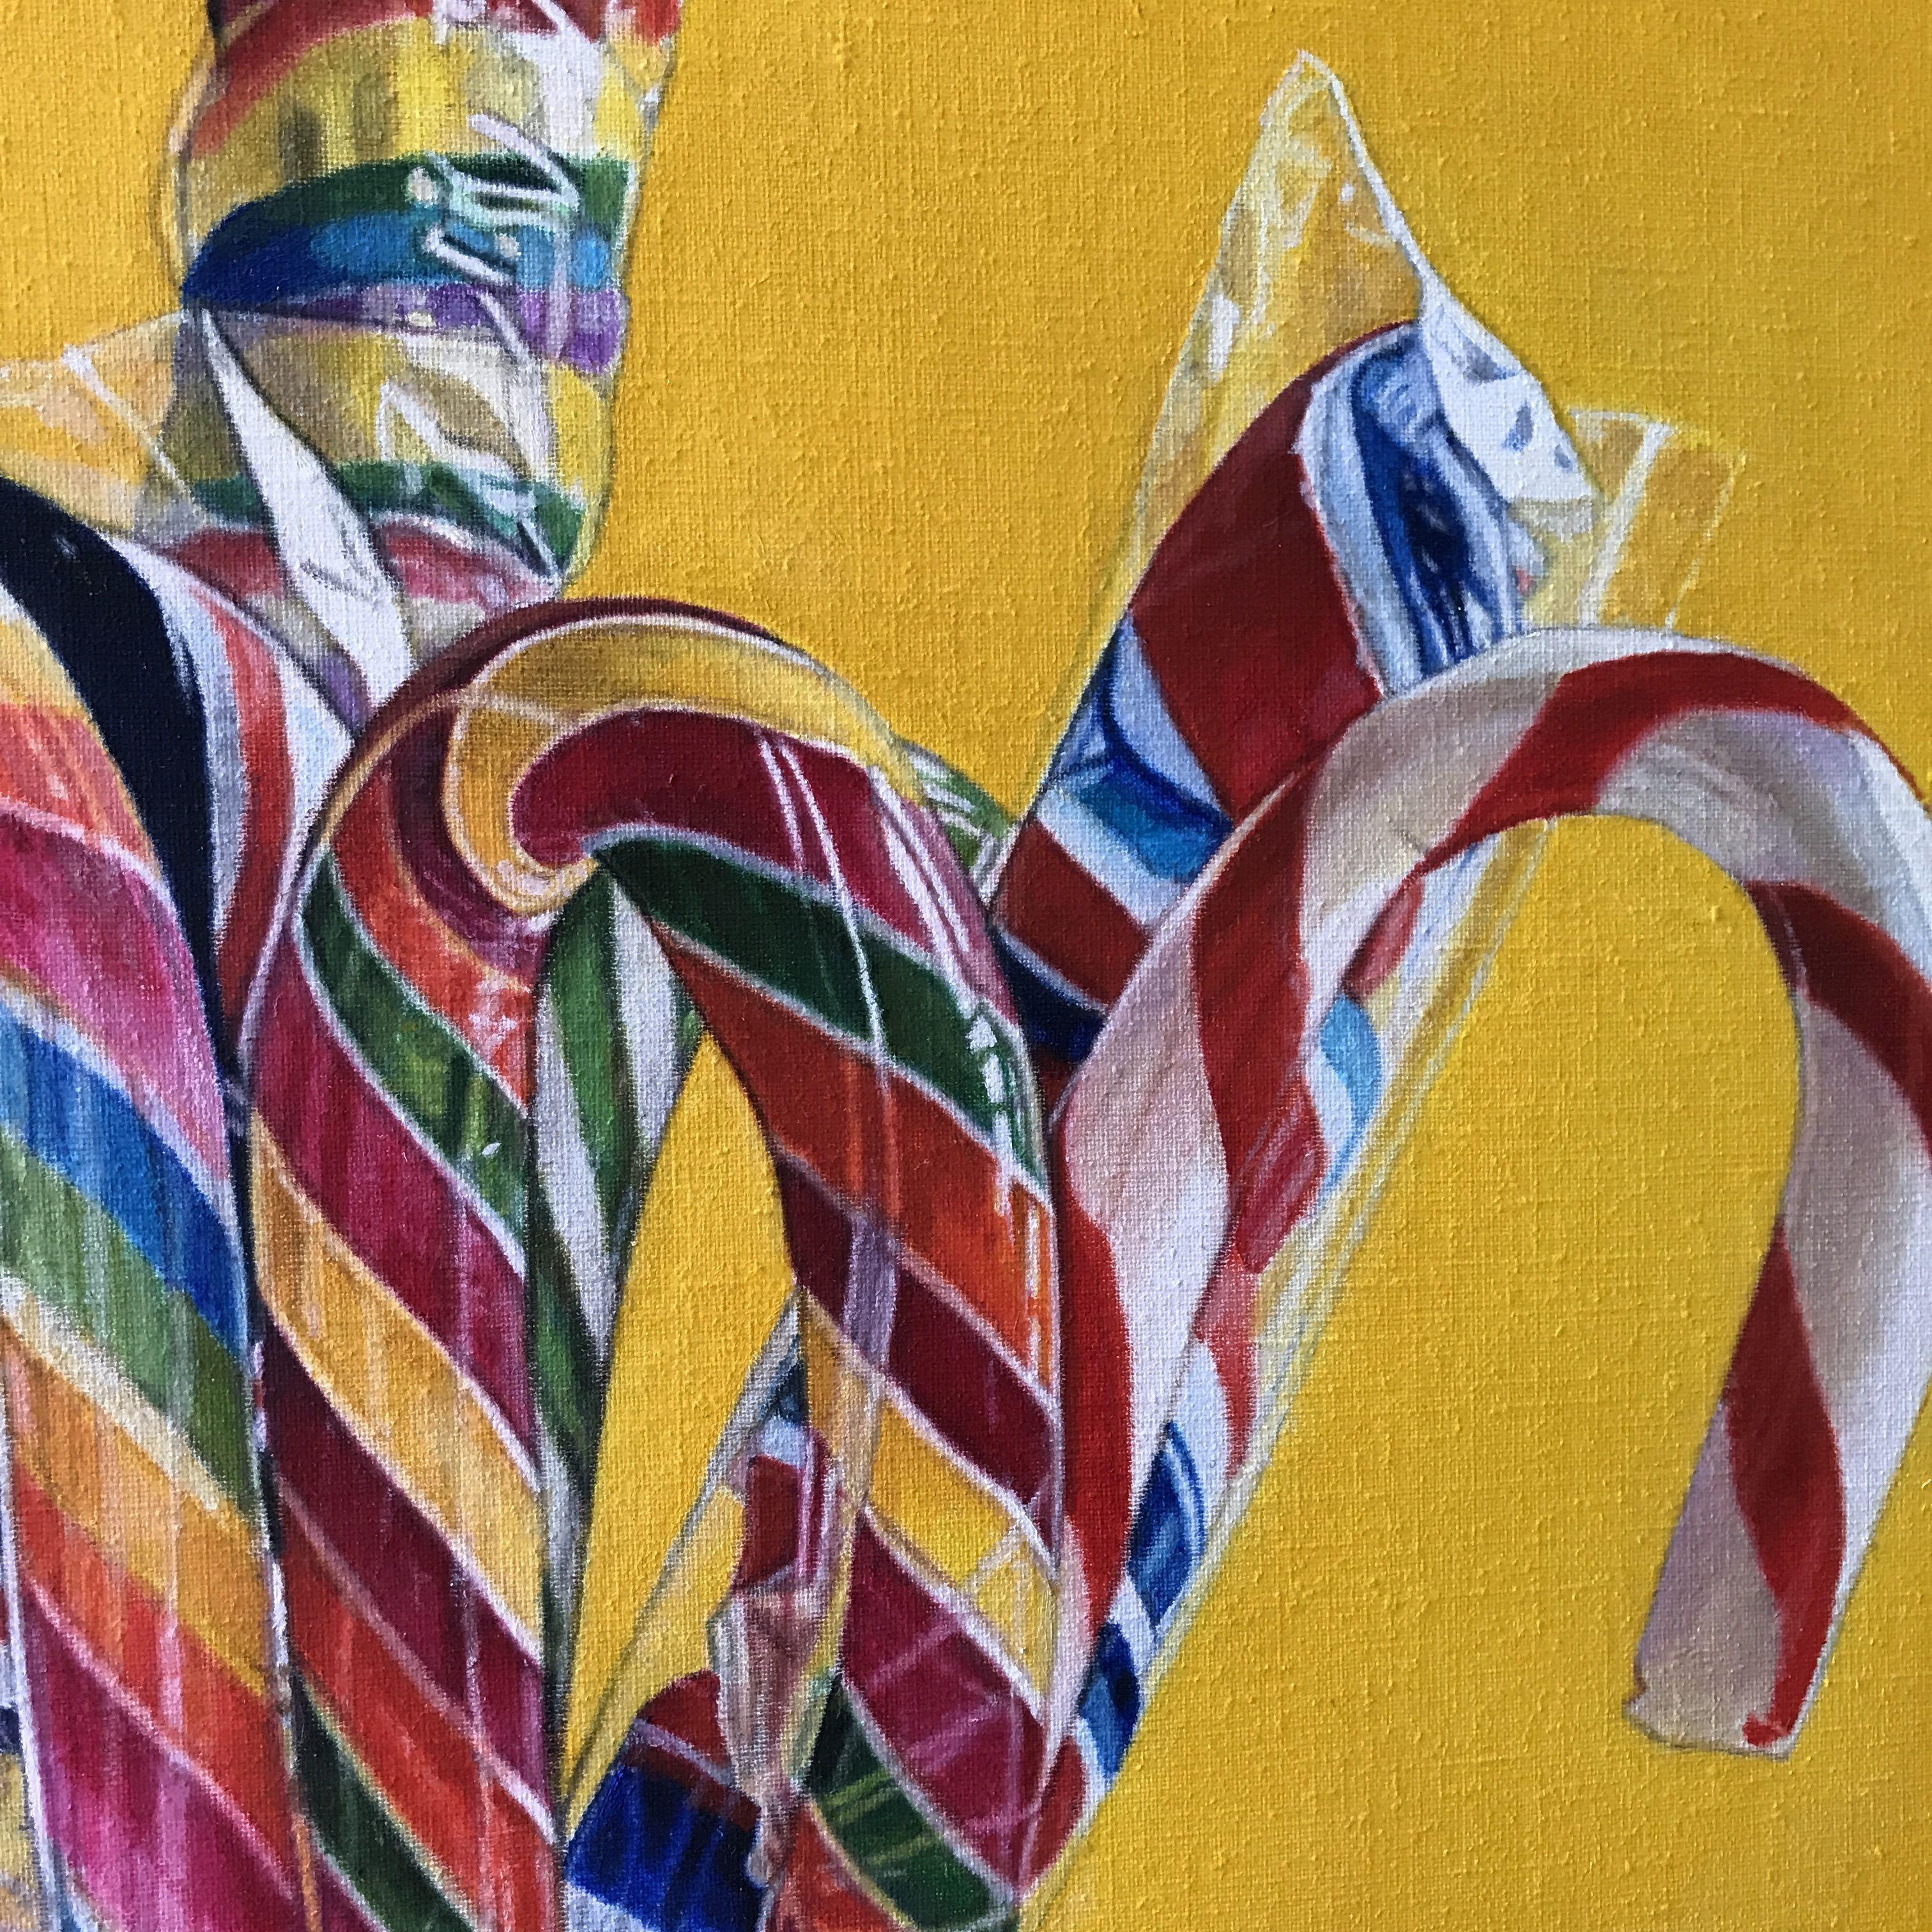 Candy-canes in a blue vase on a yellow background  Several layers of paint  Hanging hardware is provided :: Painting :: Photorealism :: This piece comes with an official certificate of authenticity signed by the artist :: Ready to Hang: No ::